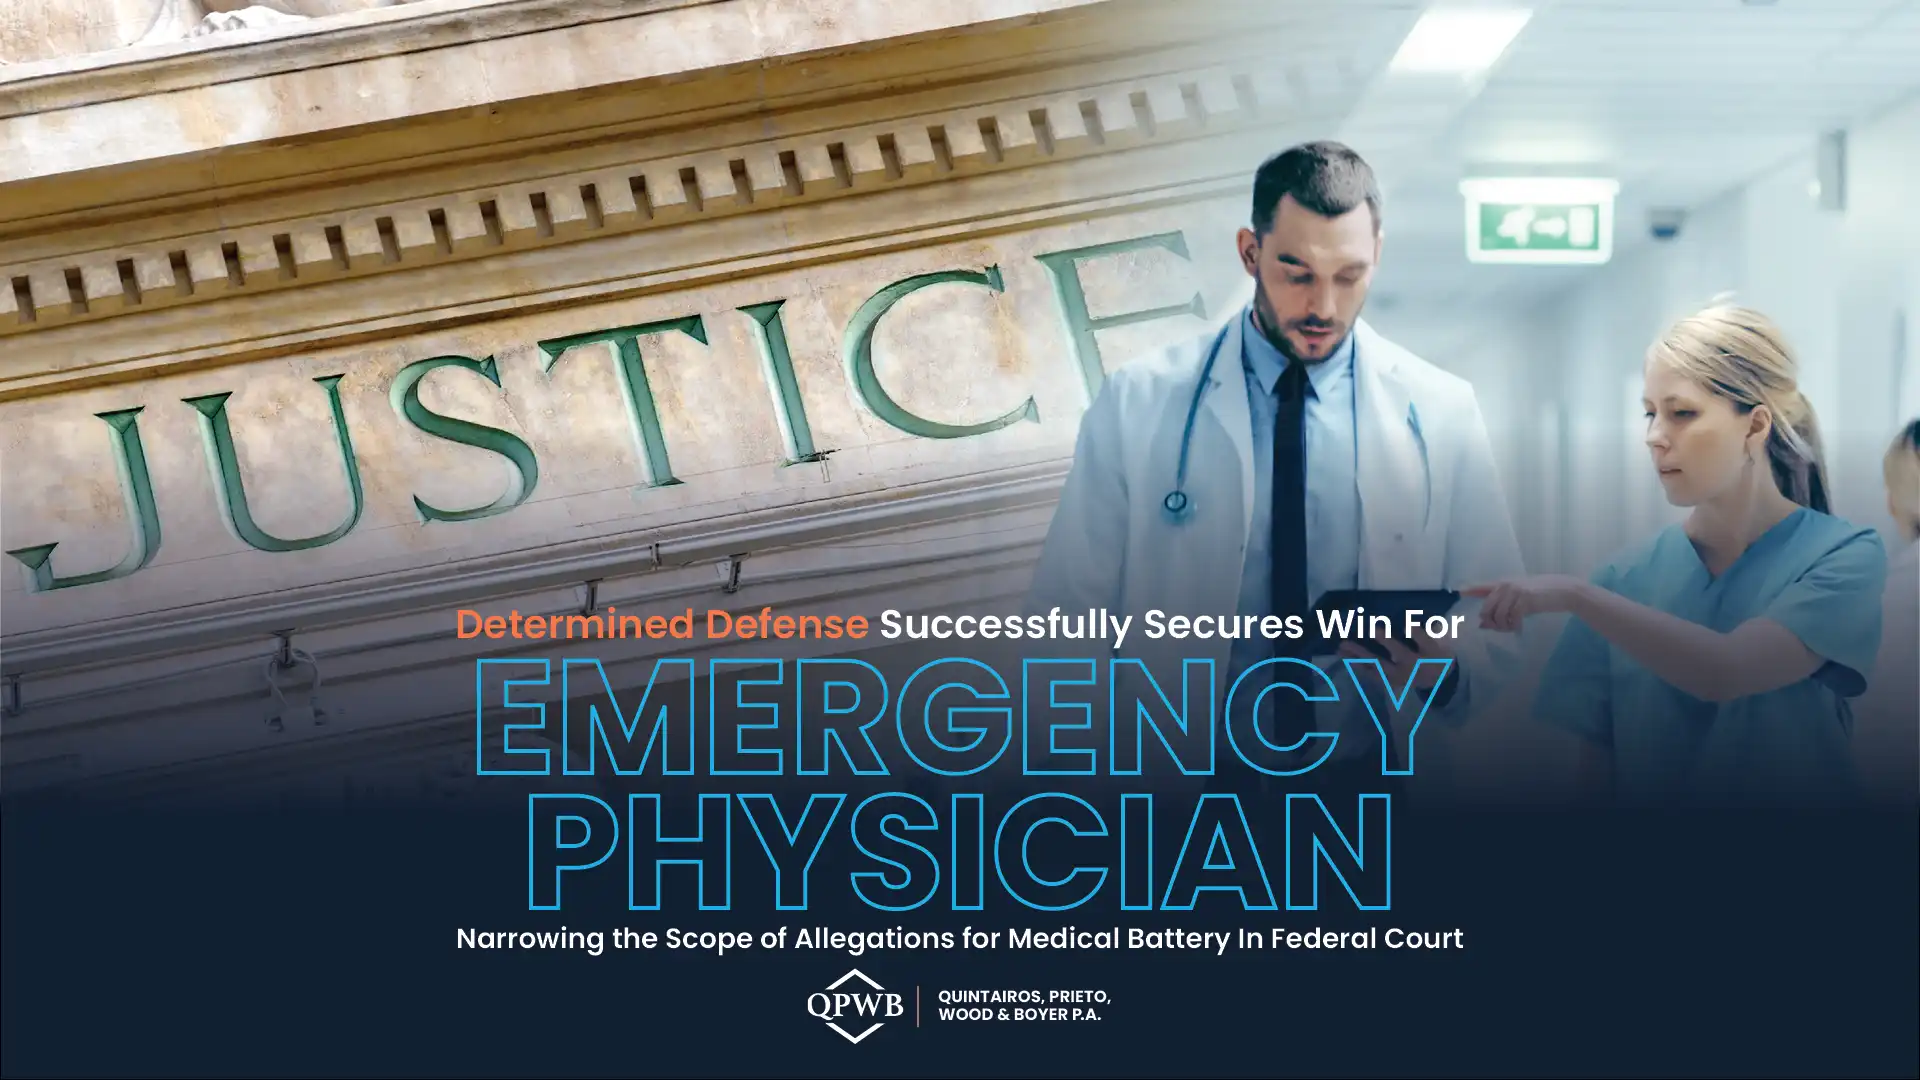 Determined Defense Successfully Secures Win For Emergency Physician, Narrowing the Scope of Allegations for Medical Battery In Federal Court